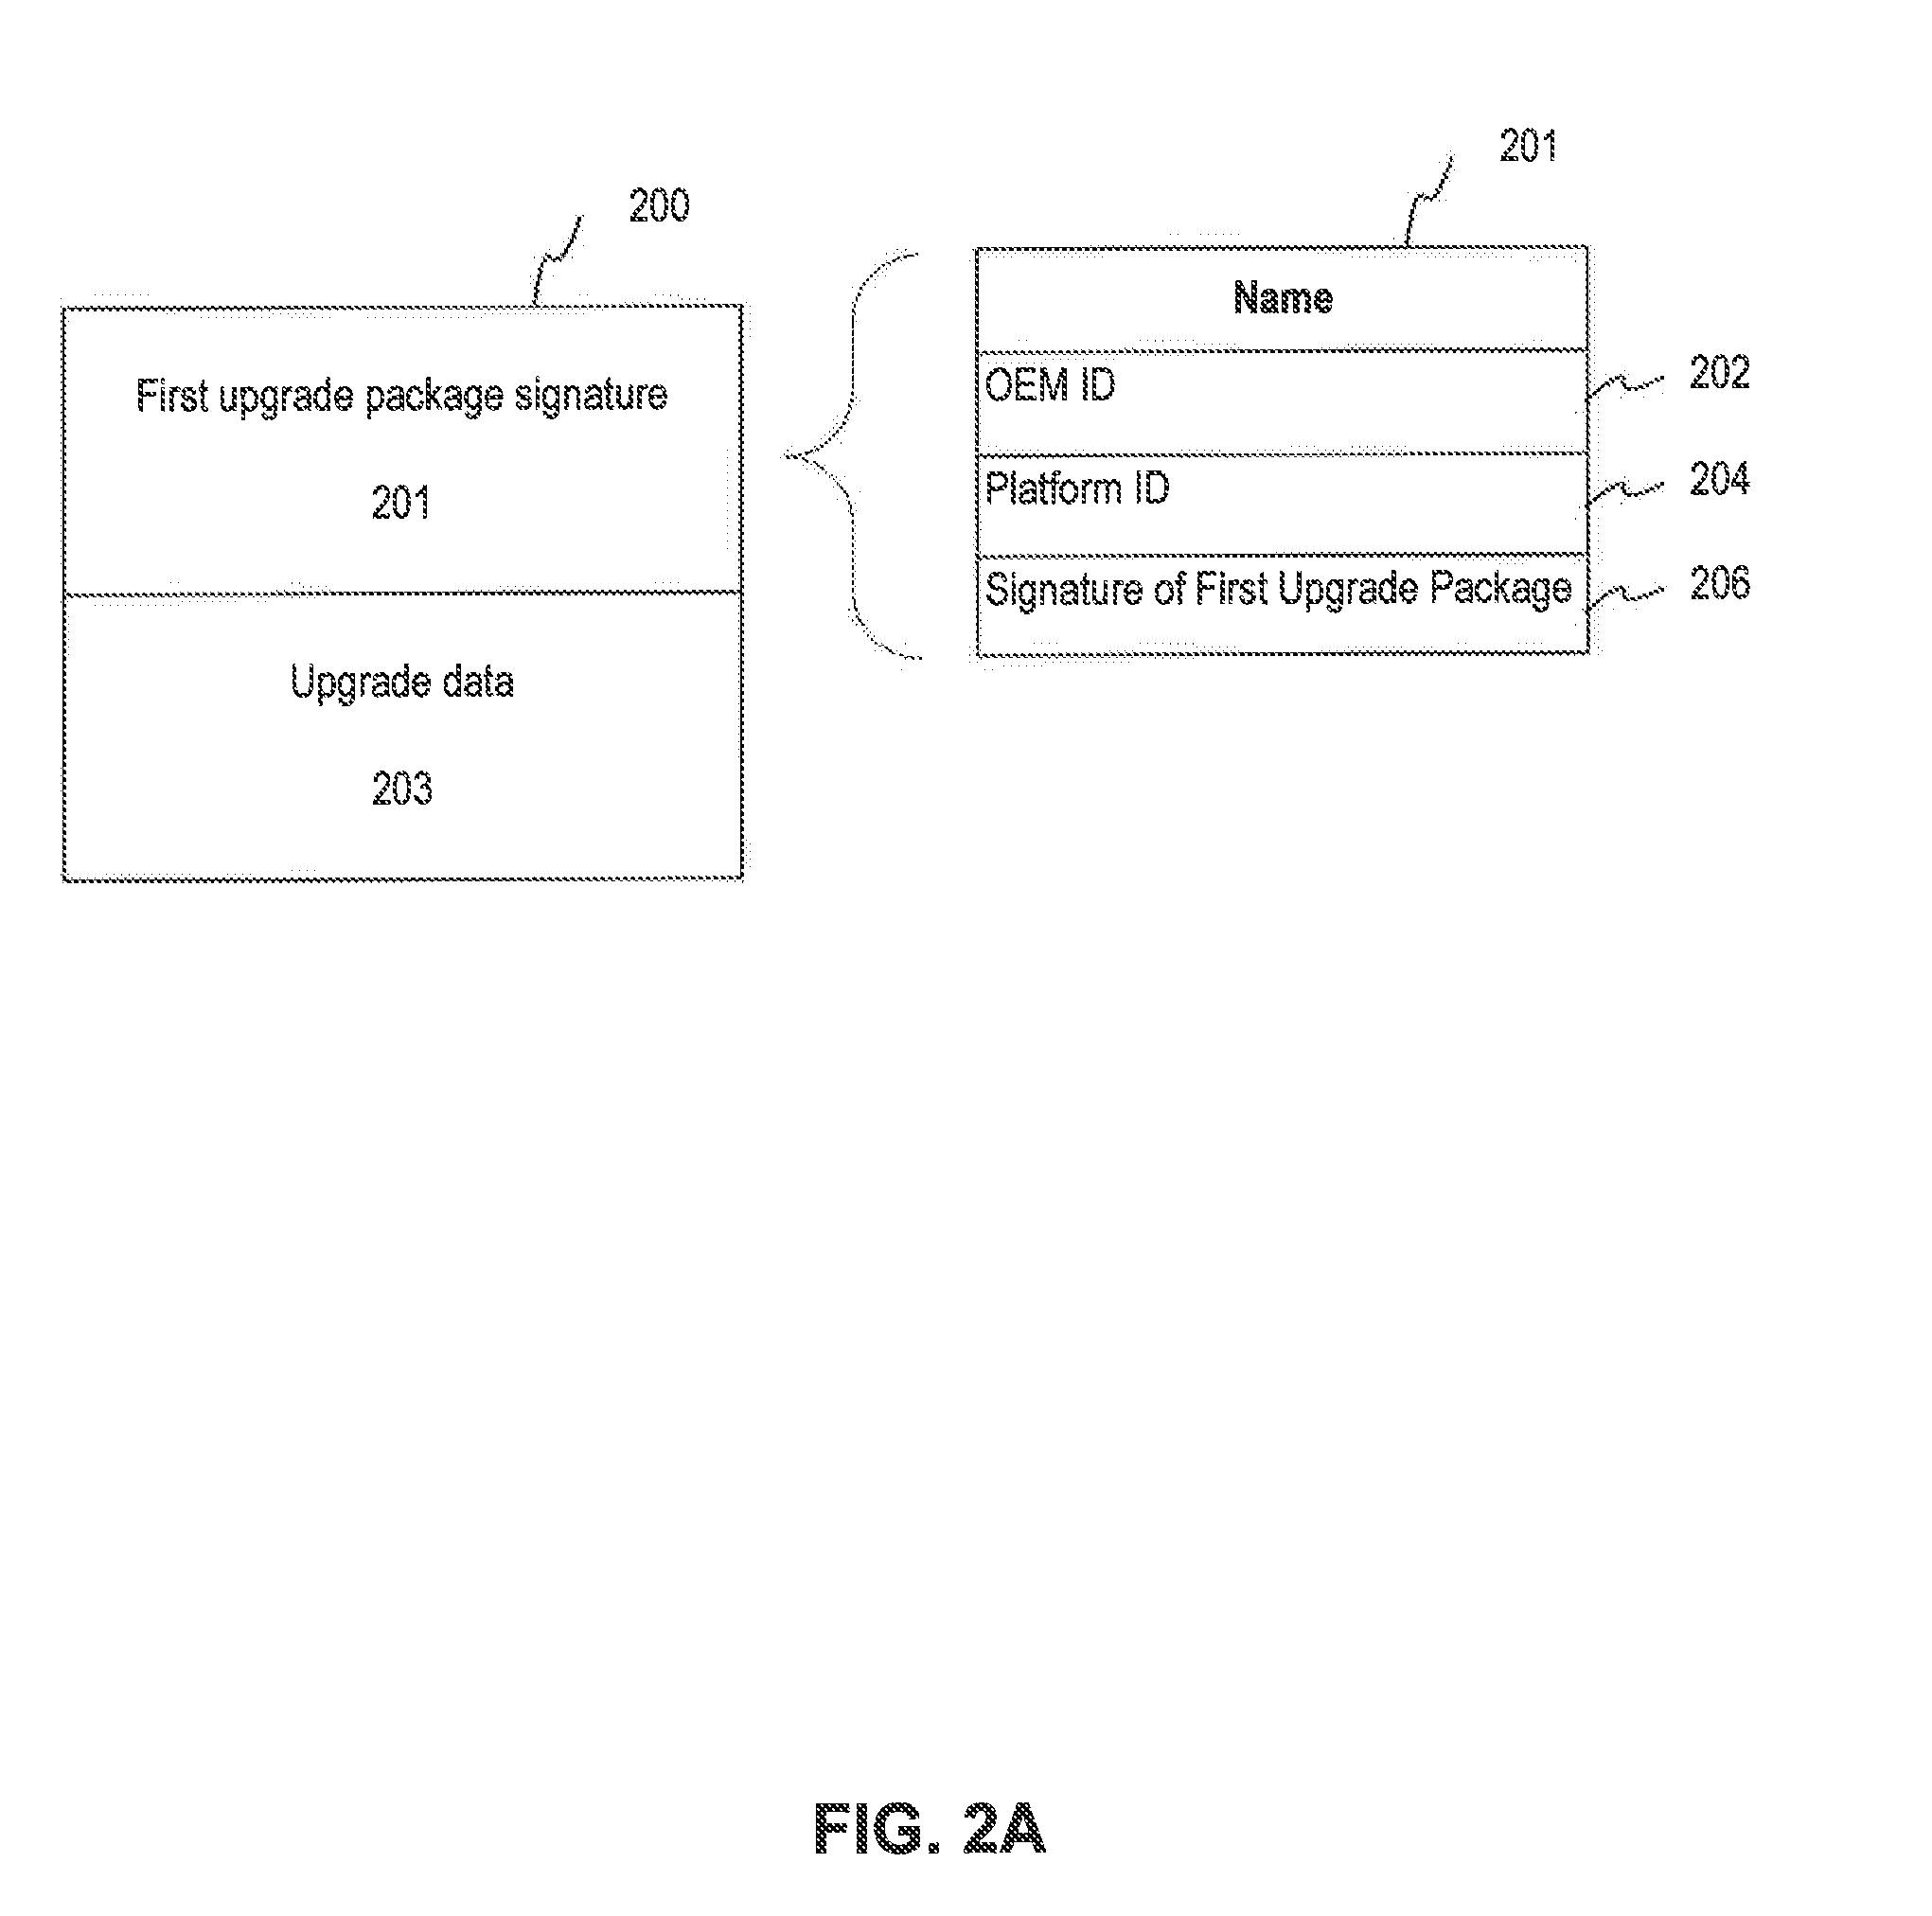 Systems and methods for installing upgraded software on electronic devices